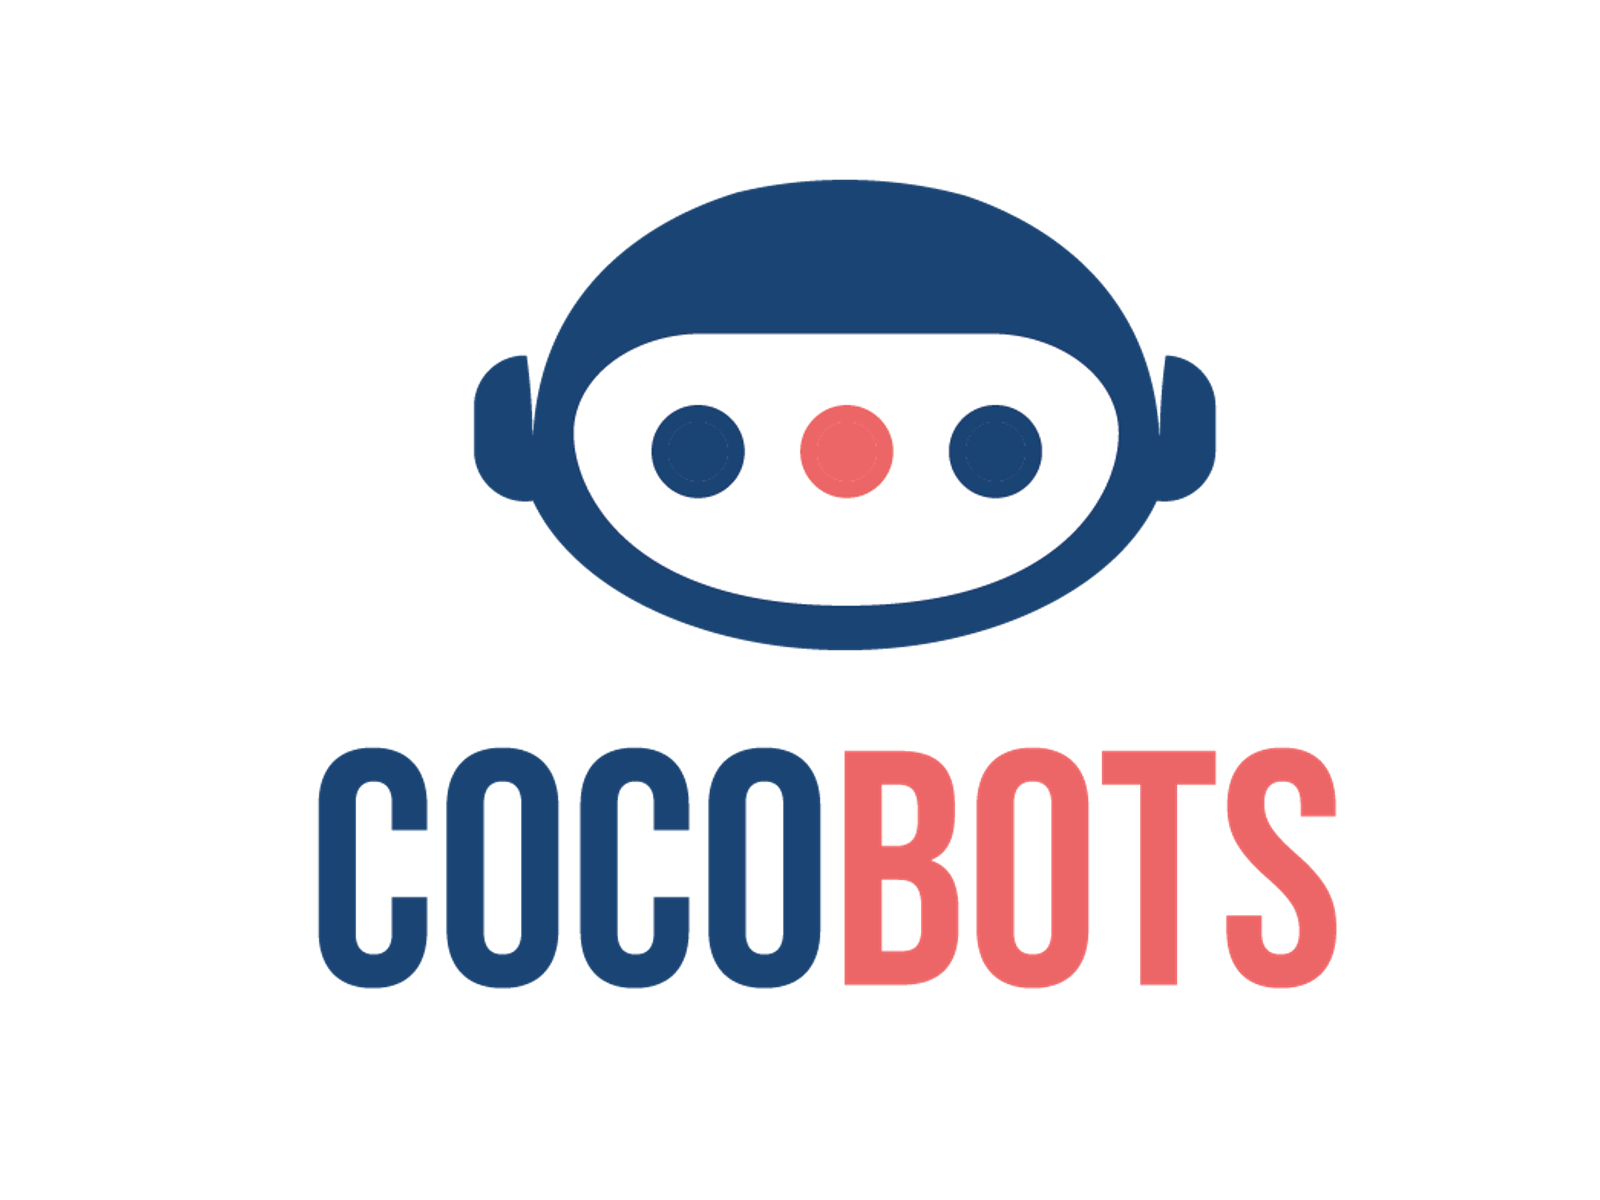 project-cocobots logo